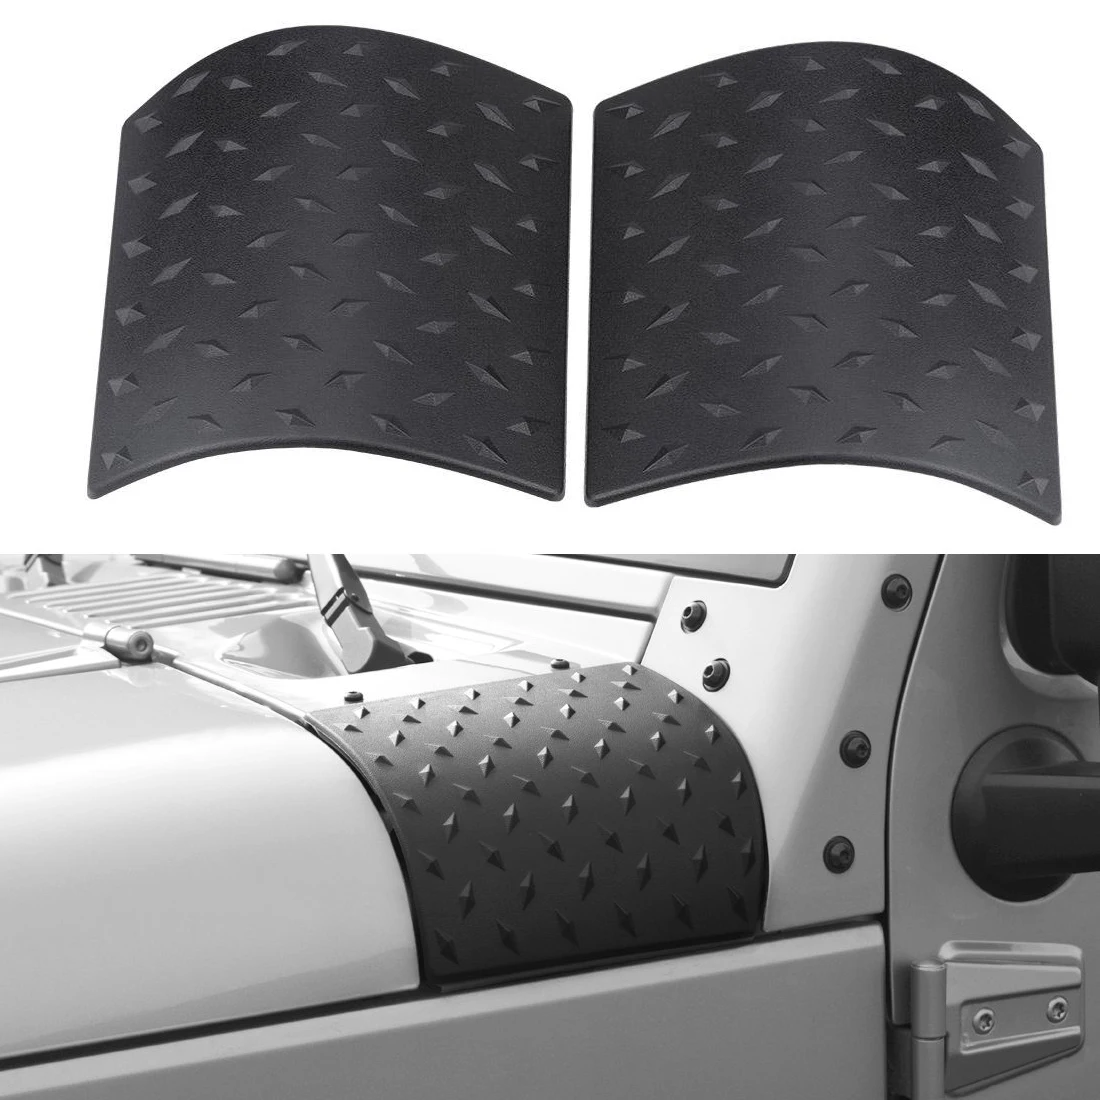 

1PAIR Car Cowl Body Armor Hood Cover Outer Cowling Guard Protector Sticker for Jeep Wrangler JK JKU Unlimited Rubicon Sahara